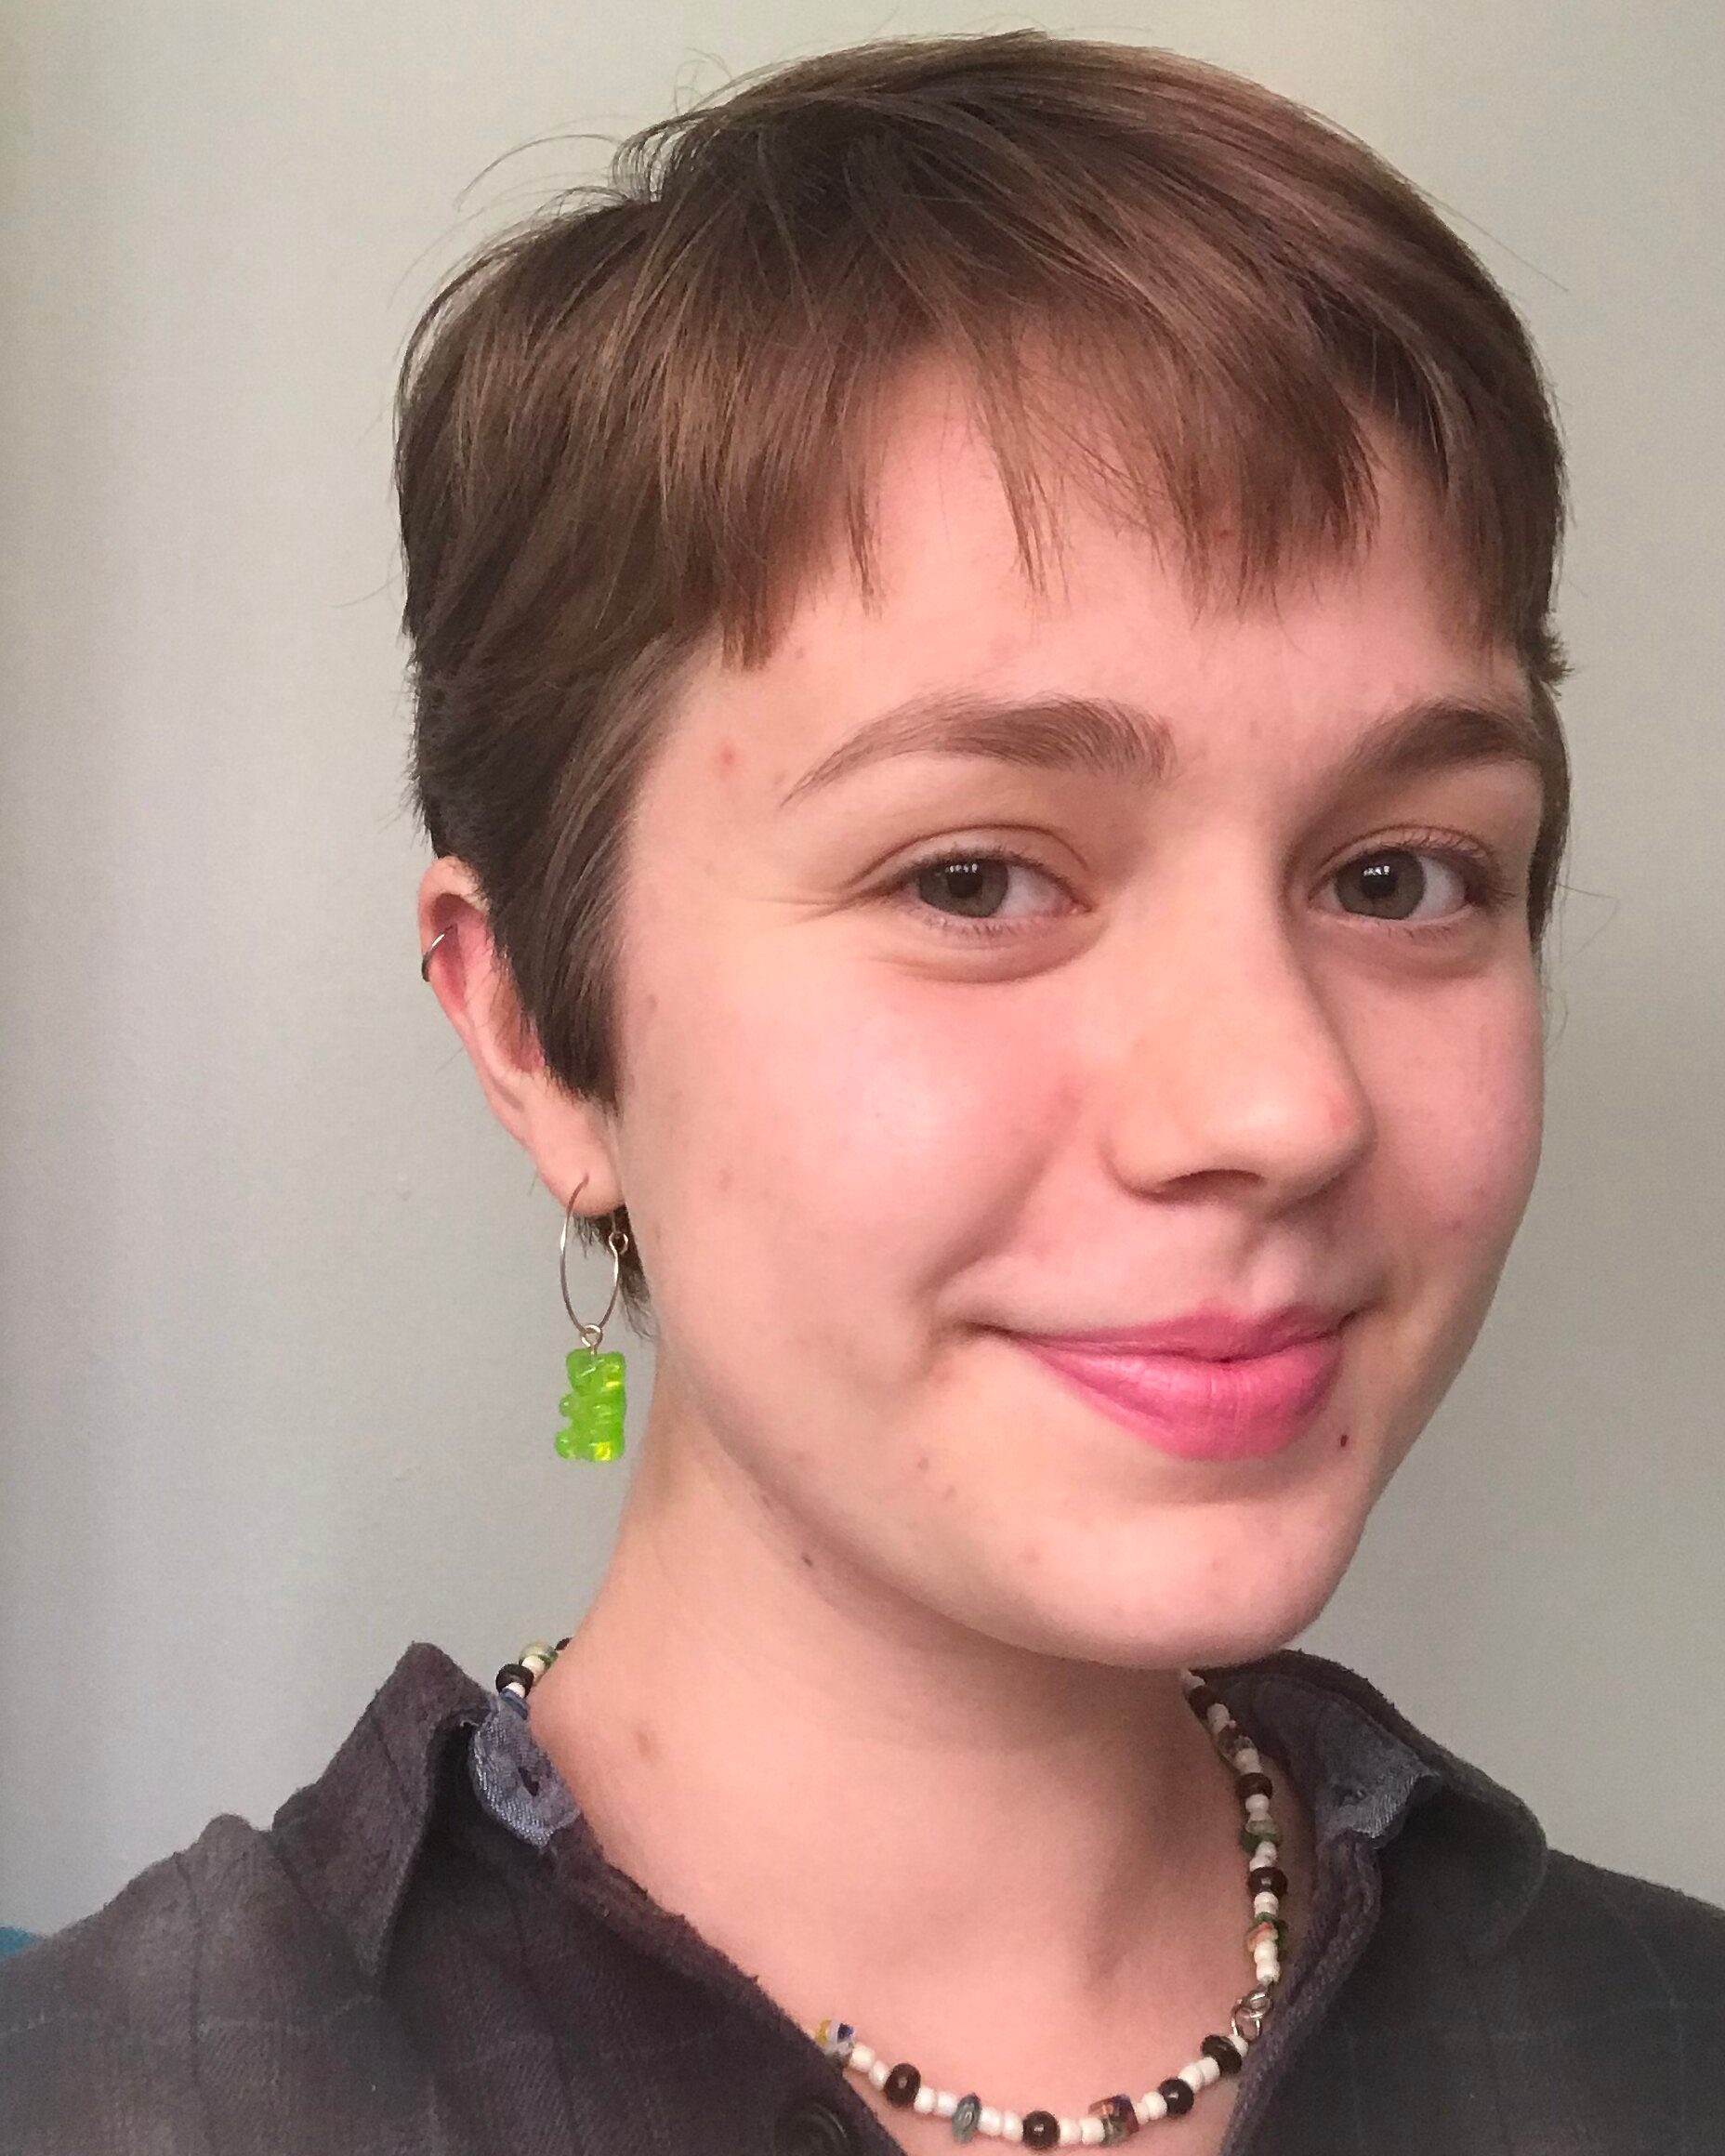 Person with short straight light brown hair smiling wearing a brown shirt and a beaded neacklace and a green gummy bear earing